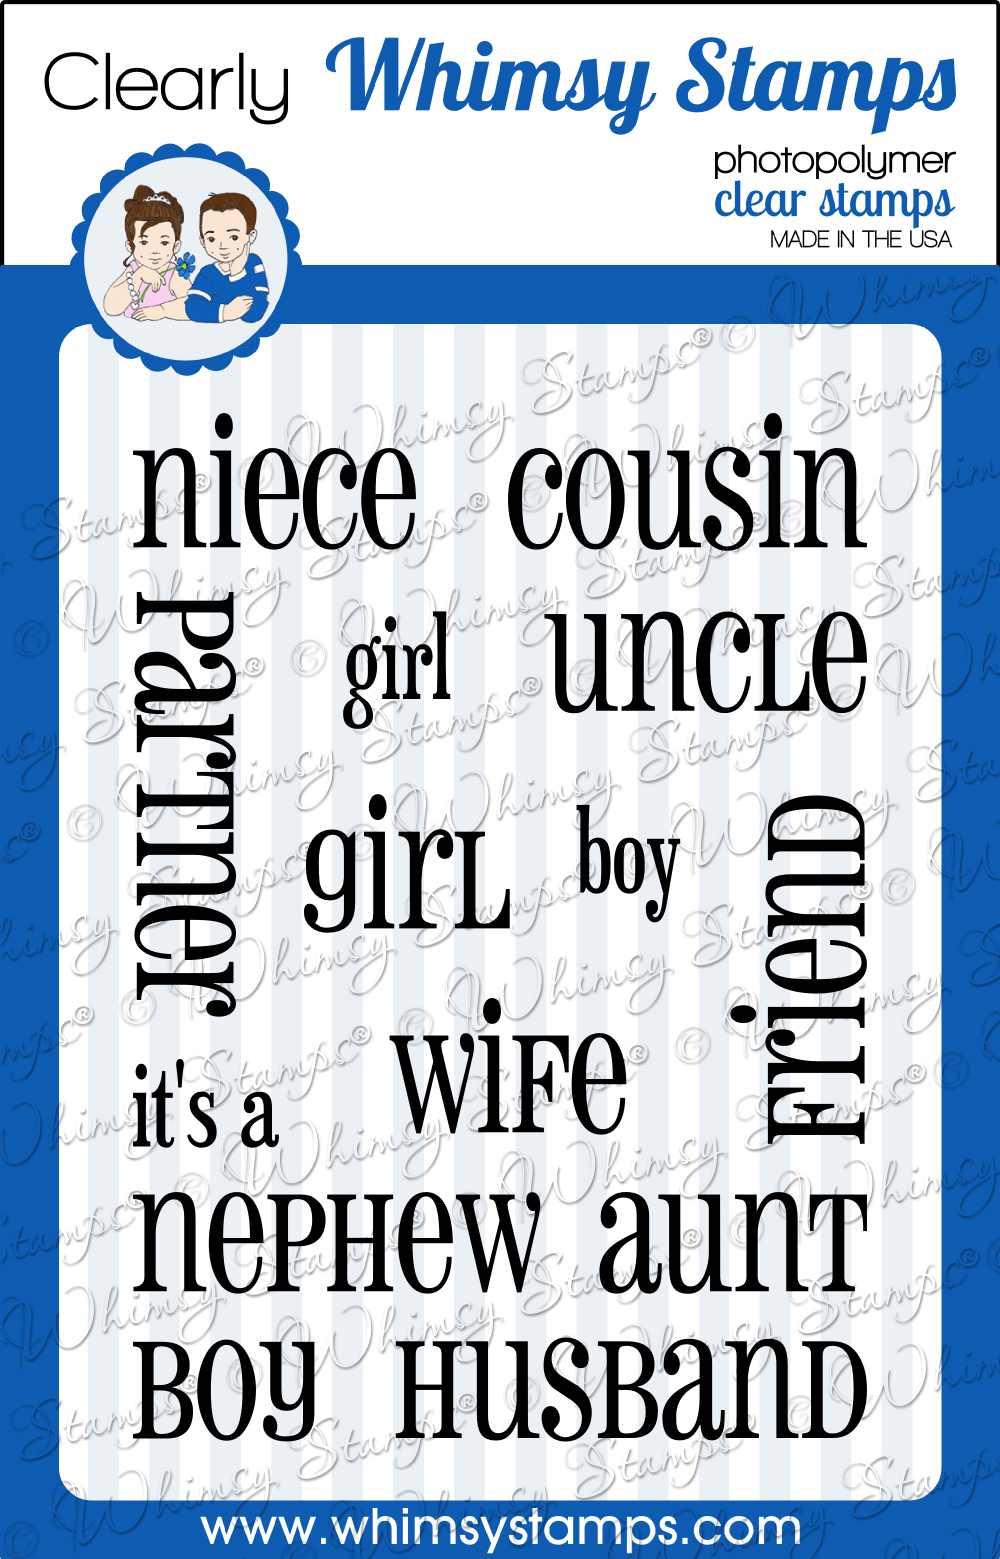 http://www.whimsystamps.com/index.php?main_page=product_info&cPath=81_82&products_id=3163